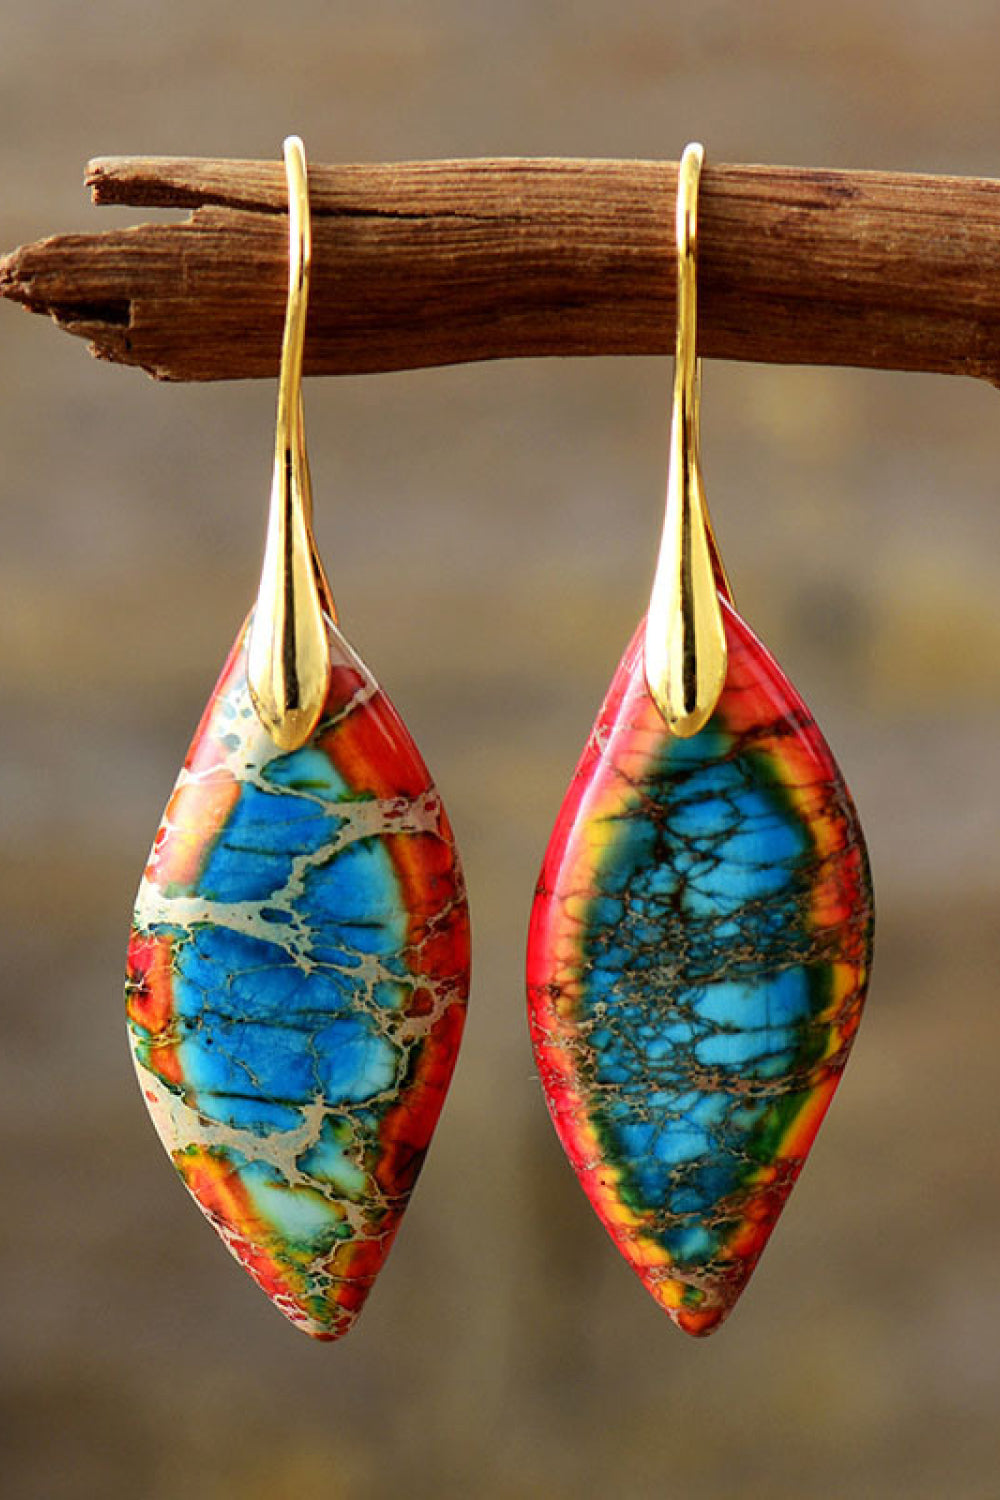 Handmade Natural Stone Dangle Earrings Available in Multiple Colors